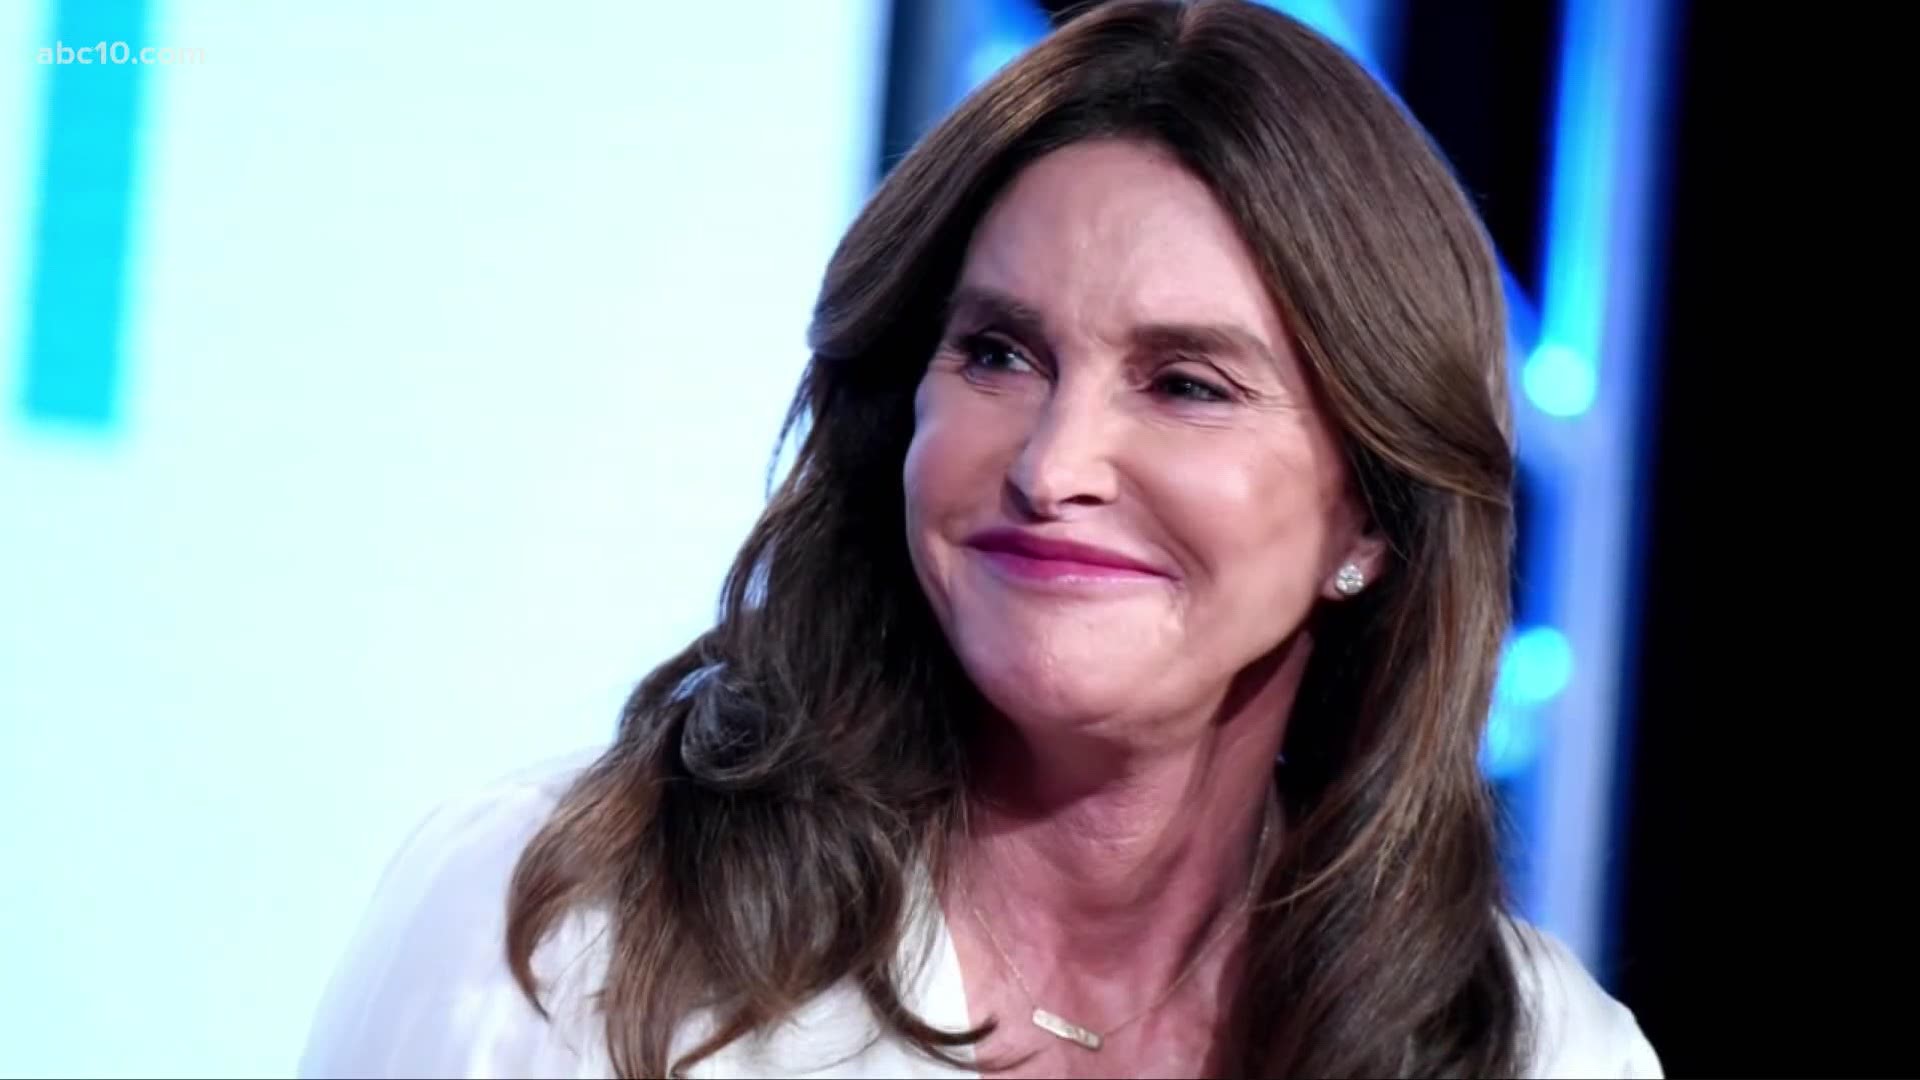 Republican Caitlyn Jenner said Friday she will run for governor of California, injecting a jolt of celebrity into an emerging campaign to oust Gov. Gavin Newsom.